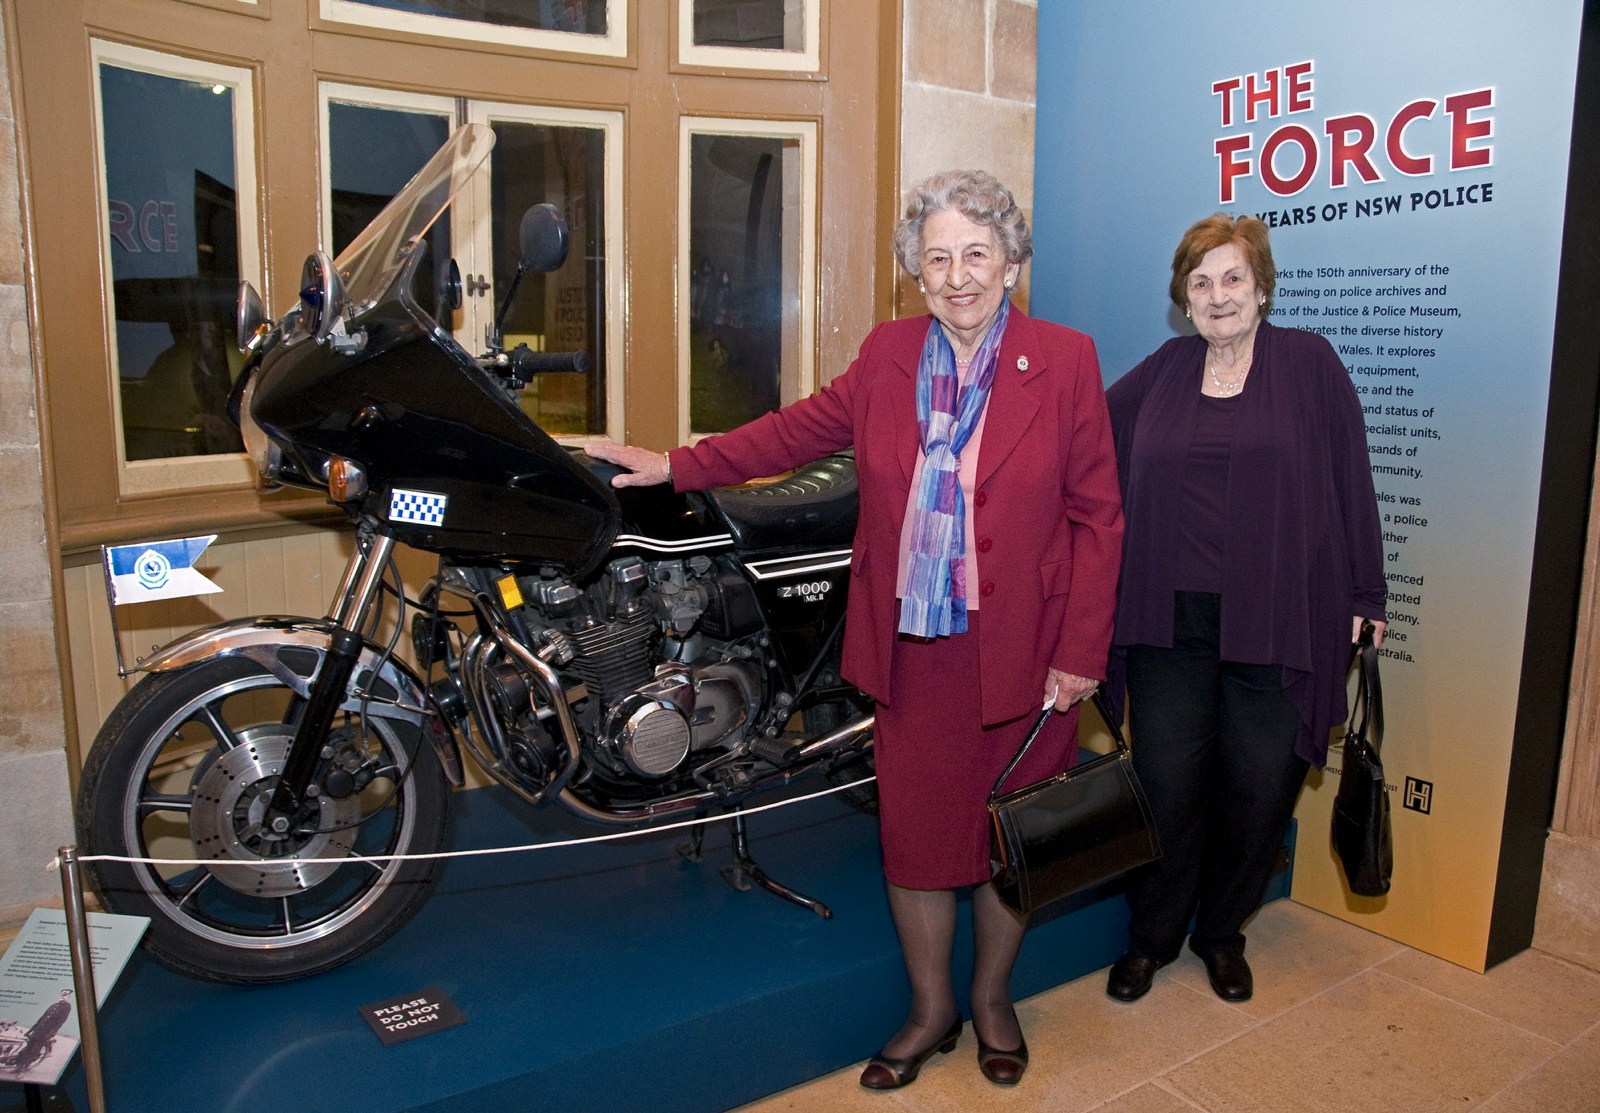 Retired NSW Policewomen, Amy Taylor and Eva Boyd, Hughes at the Justice and Police Museum